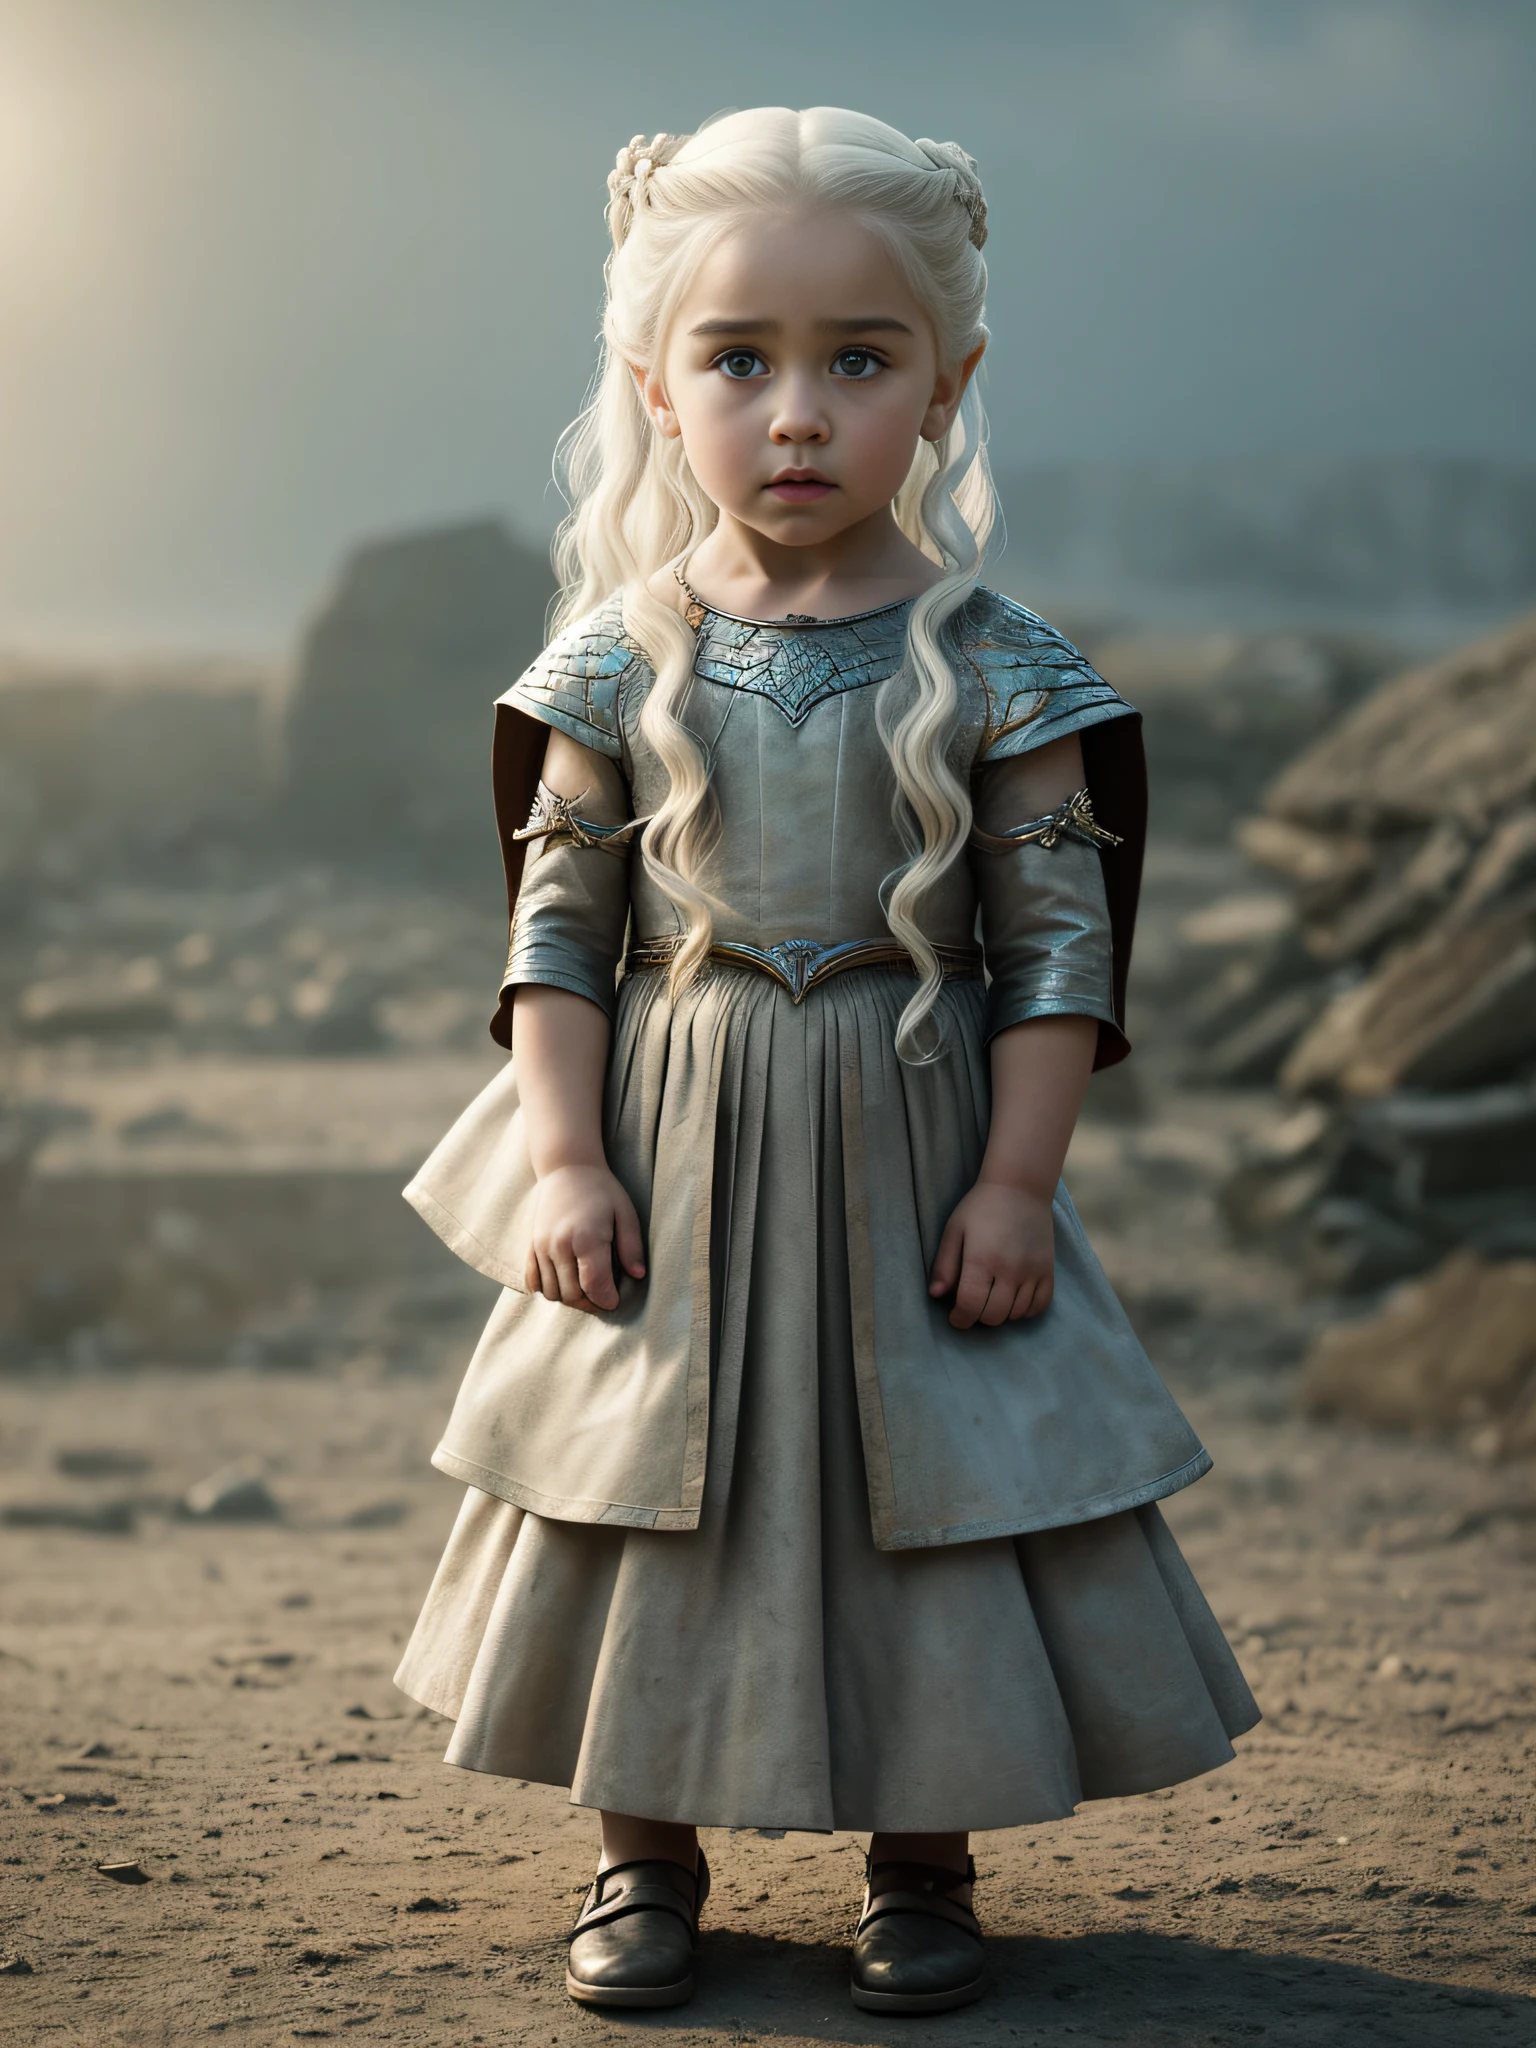 raw fullbody, cute and beautiful ((5 year old)) childhood photo of [1girl, daenerys targaryen, Emilia Clarke], ((1girl, 5 year old)))), medieval clothing,((half body shot)), realistic proportions, realistic pupils, ((3 member family portrait)) limited palette, highres, cinematic lighting, 8k resolution, front lit, sunrise, RAW photo, Nikon 85mm, Award Winning, Glamour Photograph, extremely detailed, beautiful Ukrainian, mind-bending, Noth-Yidik, raw fullbody photo of Daenerys Targaryen at age 5 year old, highly detailed, artstation, smooth, sharp focus, 8K,, trending on instagram, trending on tumblr, hdr 4k, 8k